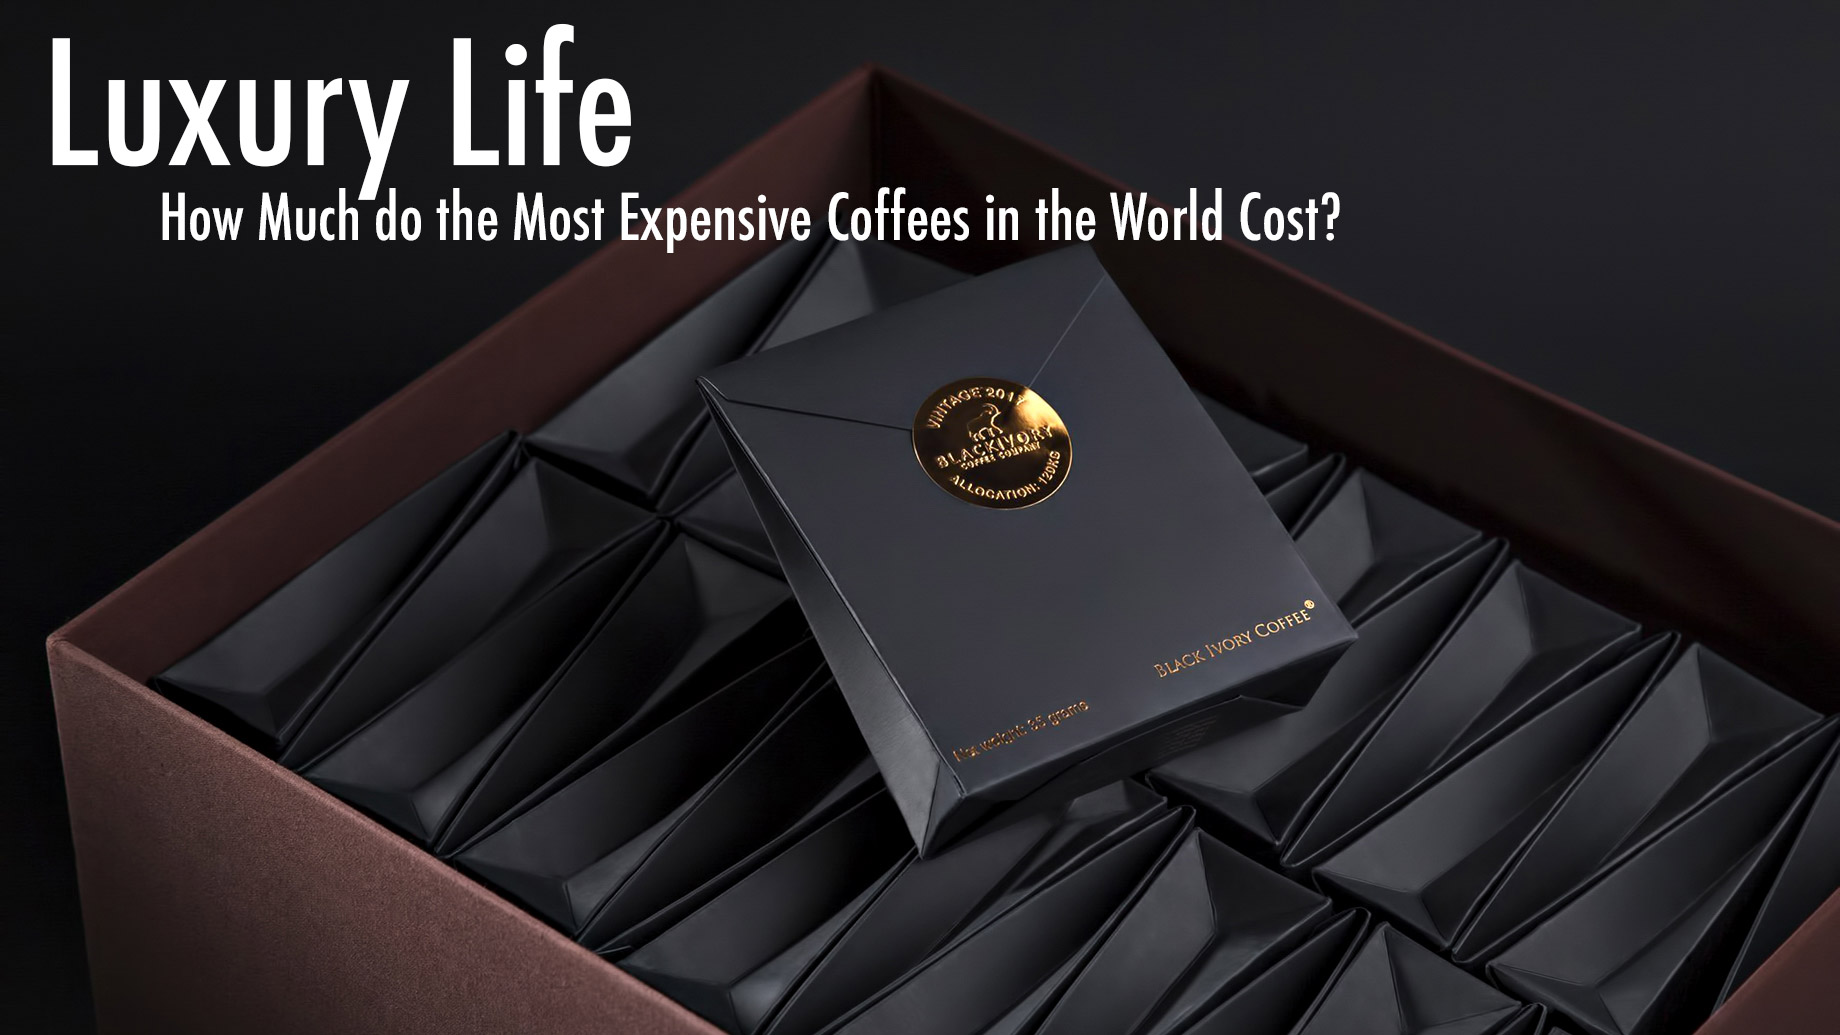 Luxury Life – How Much do the Most Expensive Coffees in the World Cost?